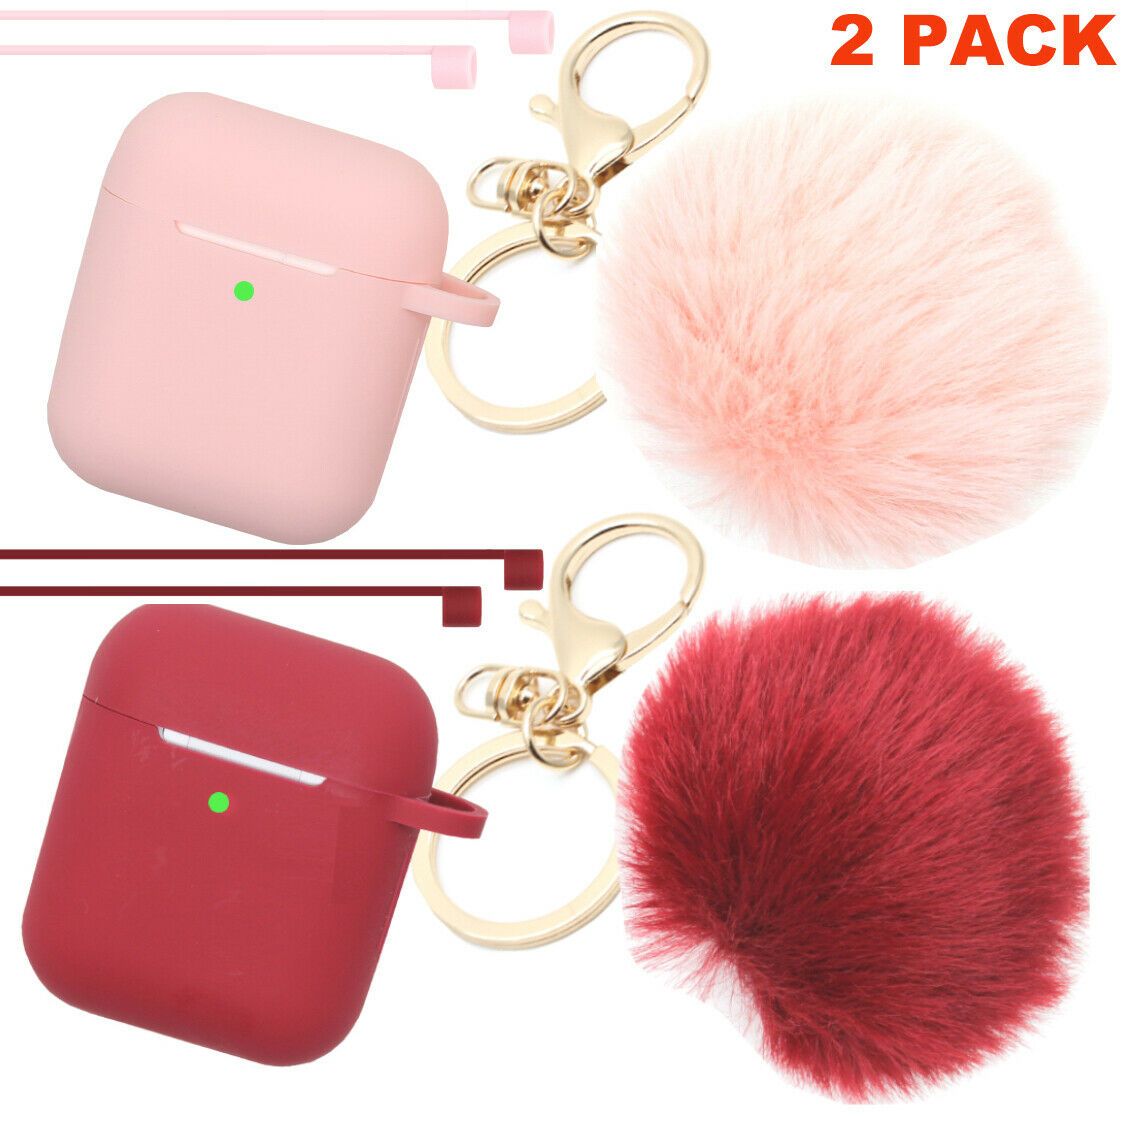 Cute Airpods Silicone Case Cover w/Fur Ball Keychain Strap for Apple Airpods 1/2 ervin.accessories Pink+Burgundy (2 Pack) 